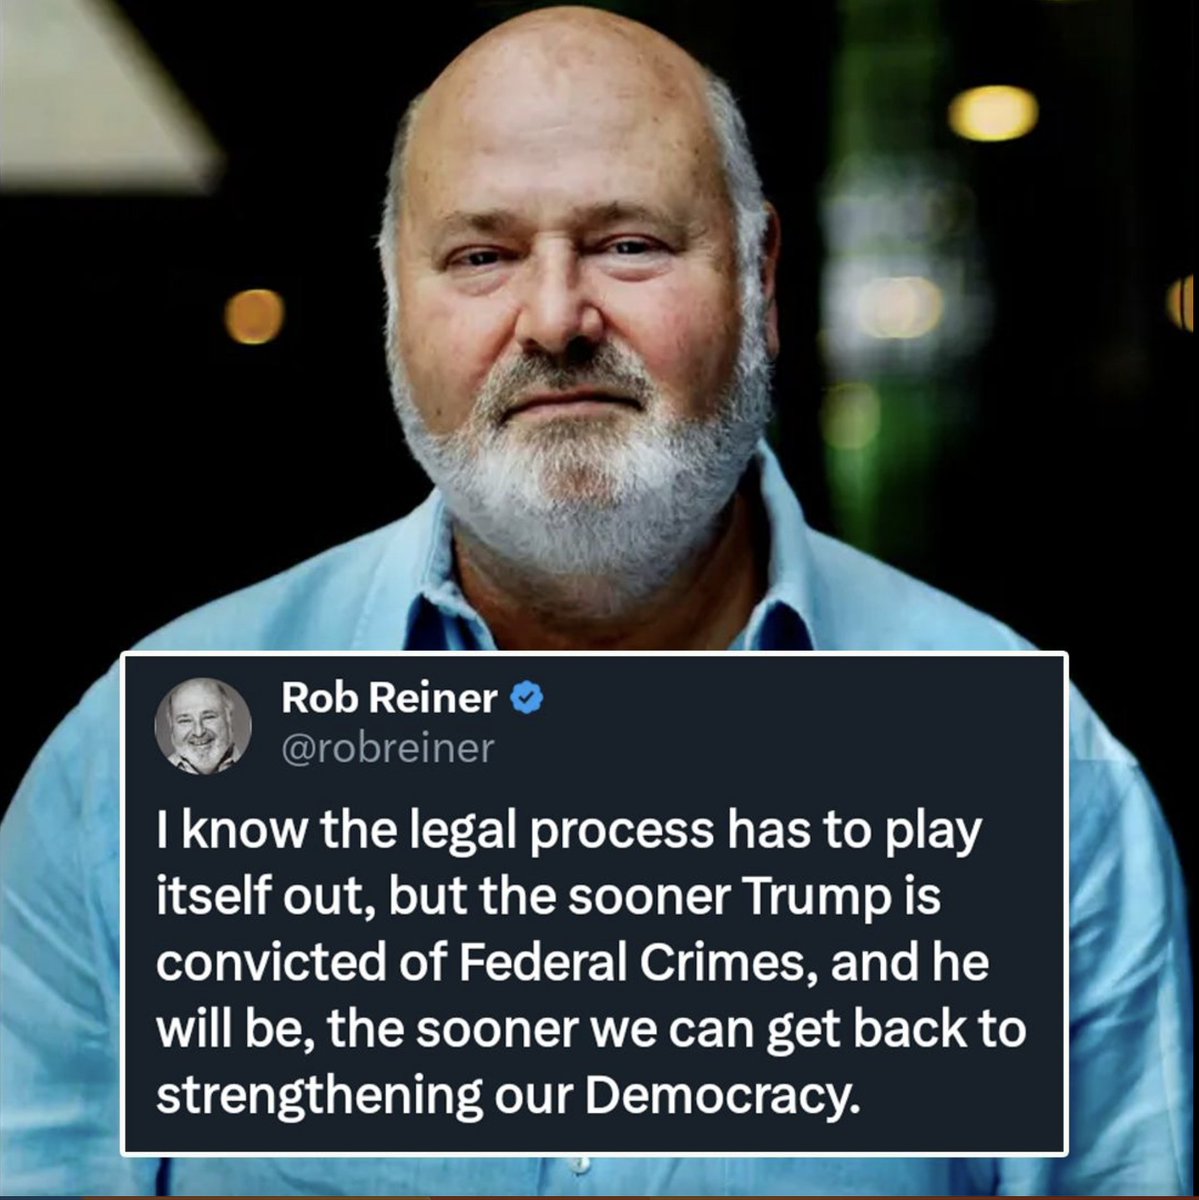 Rob Reiner nails it 👇 Convicting Trump is the first step to repairing and strengthening our Democracy, which has been so badly damaged during this dark era of Trumpism. #ProsecuteTrump